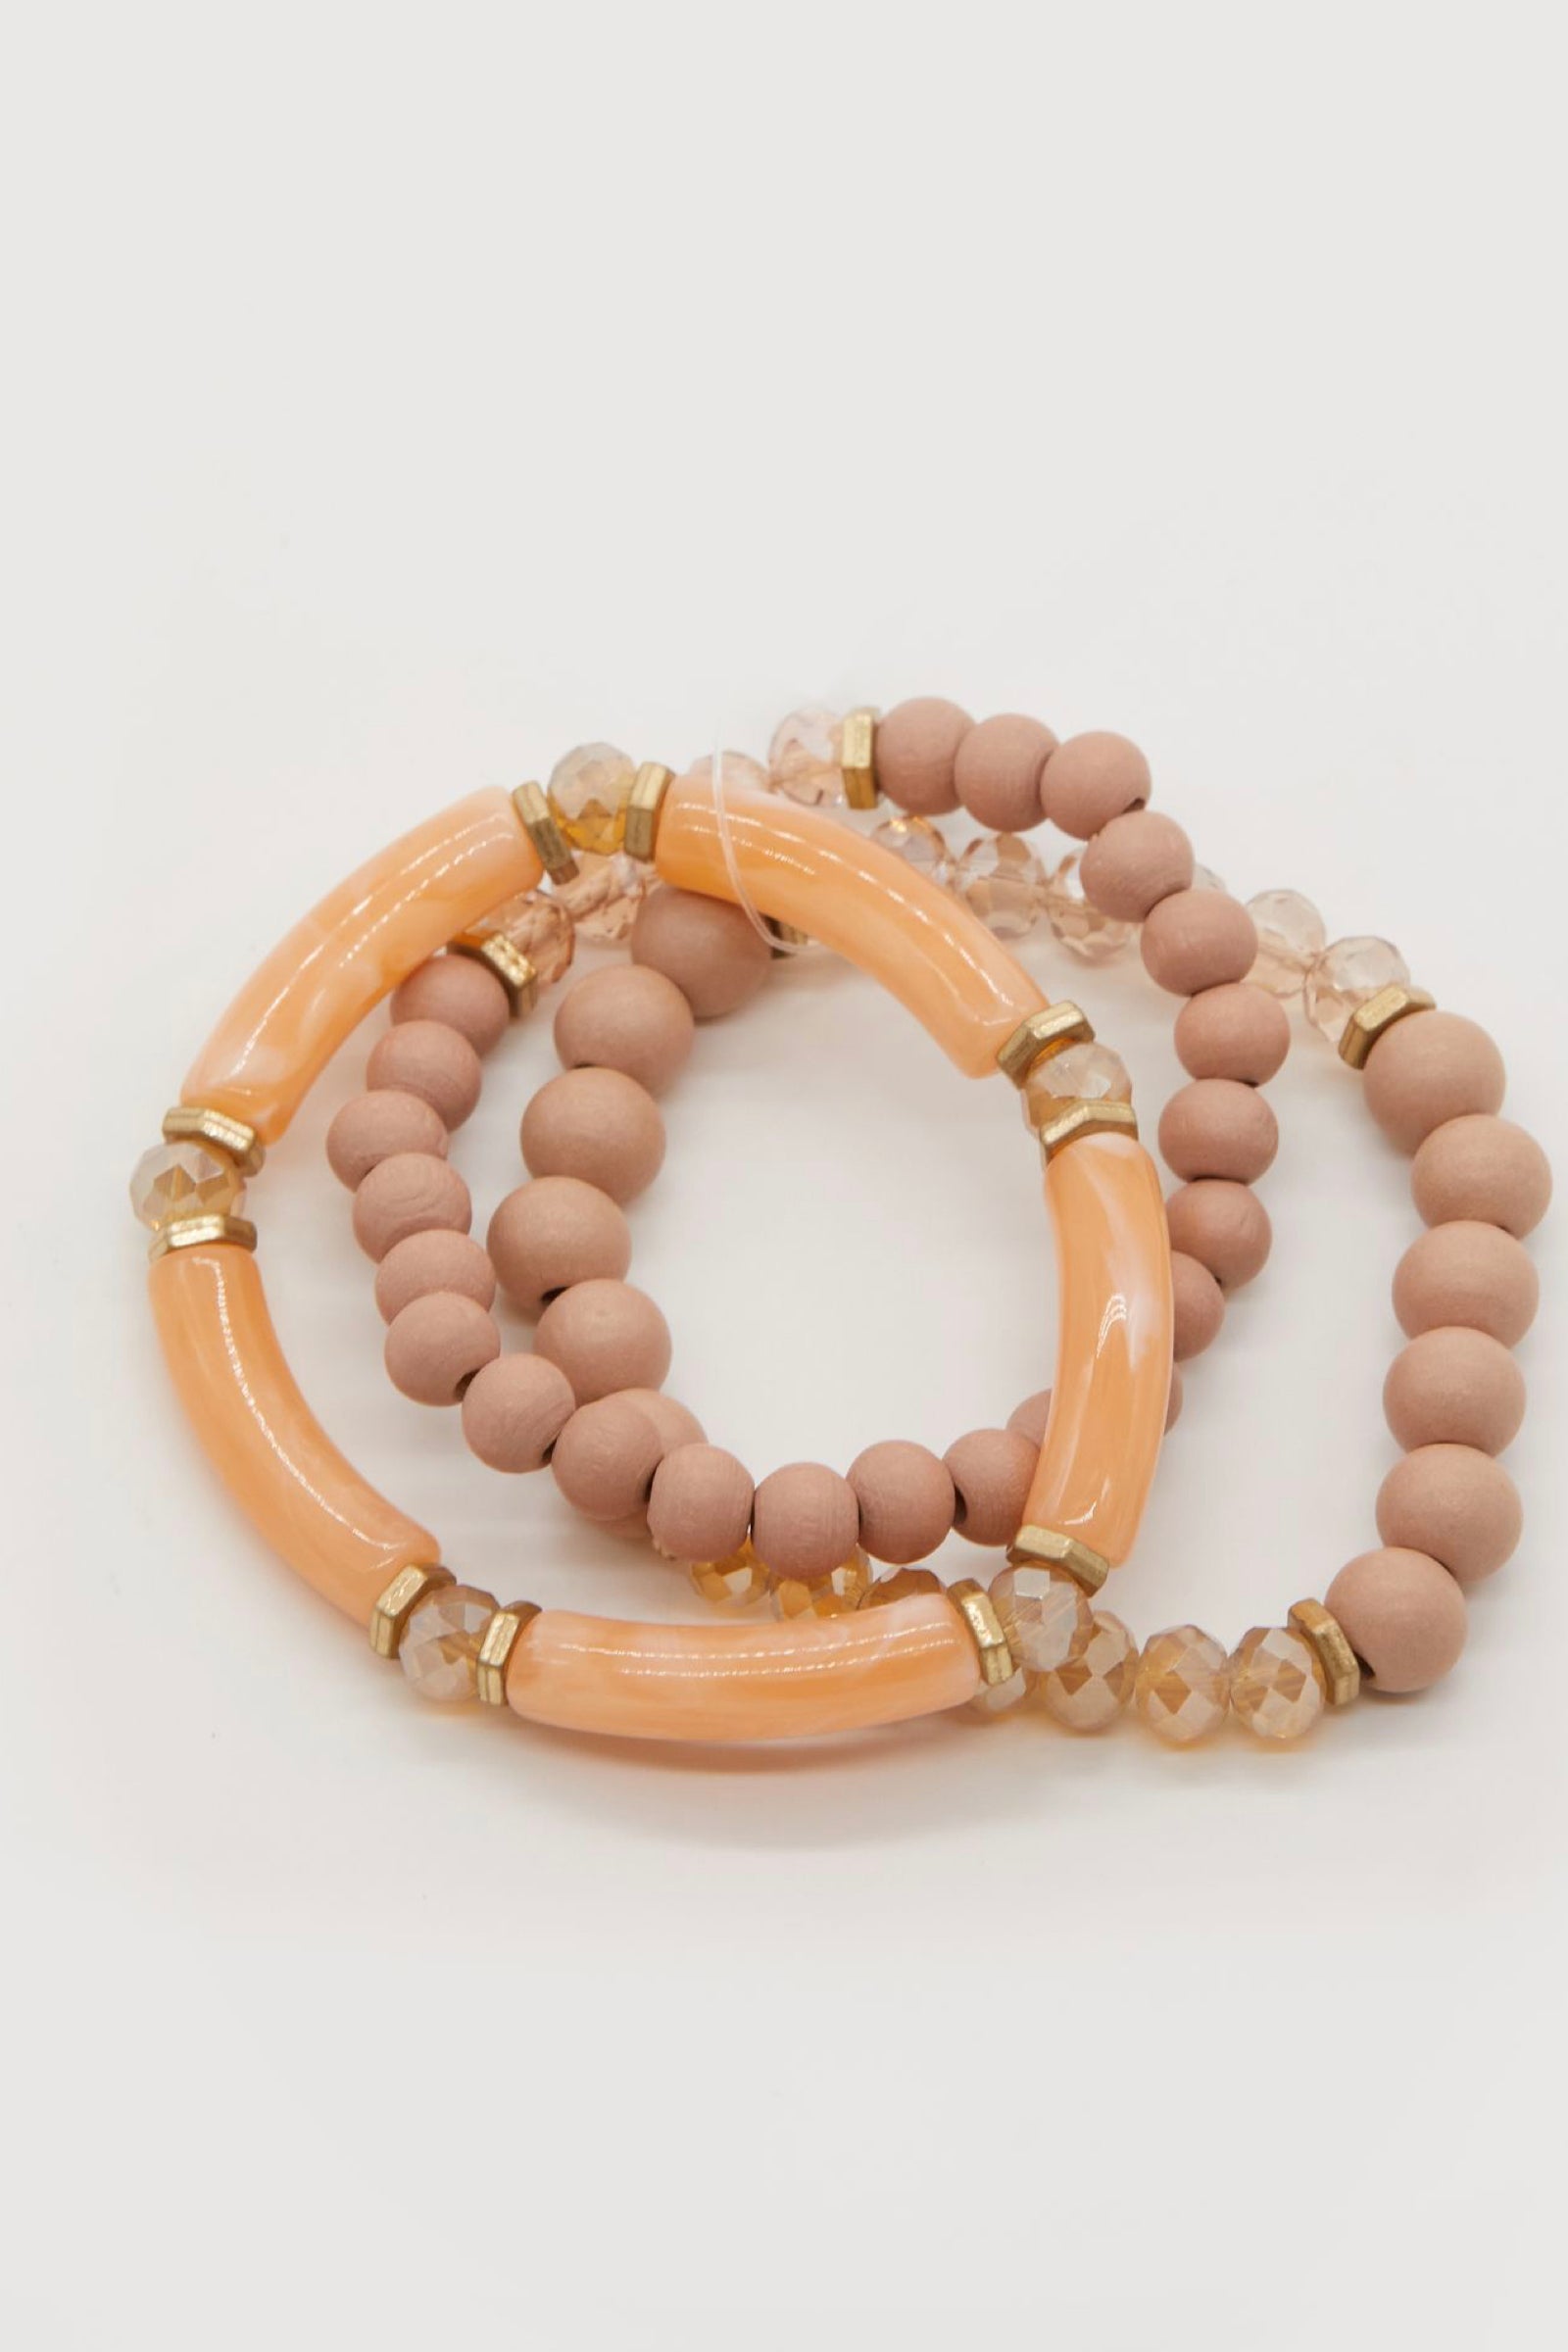 MorningWood Bracelets - Life Away From The Office Chair